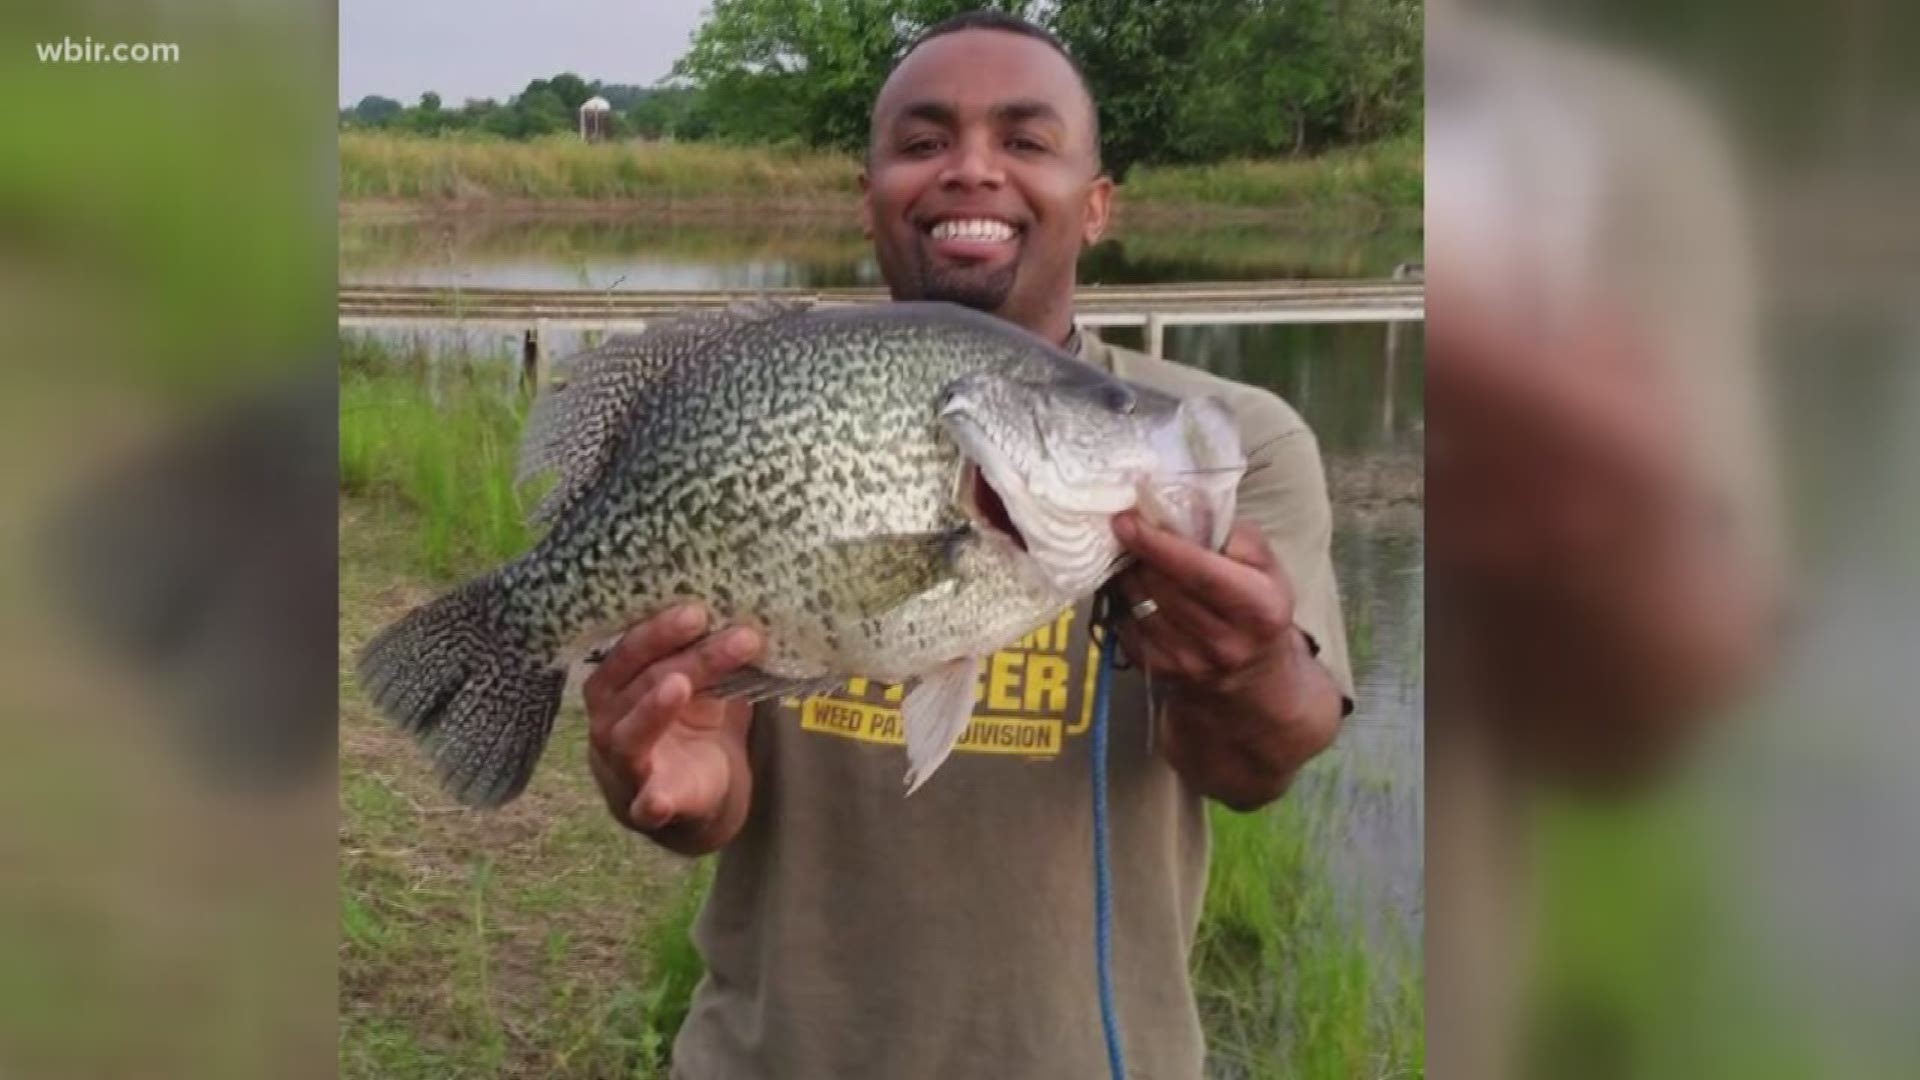 It's official: Loudon Co. fisherman reels in state, world record-breaking  fish